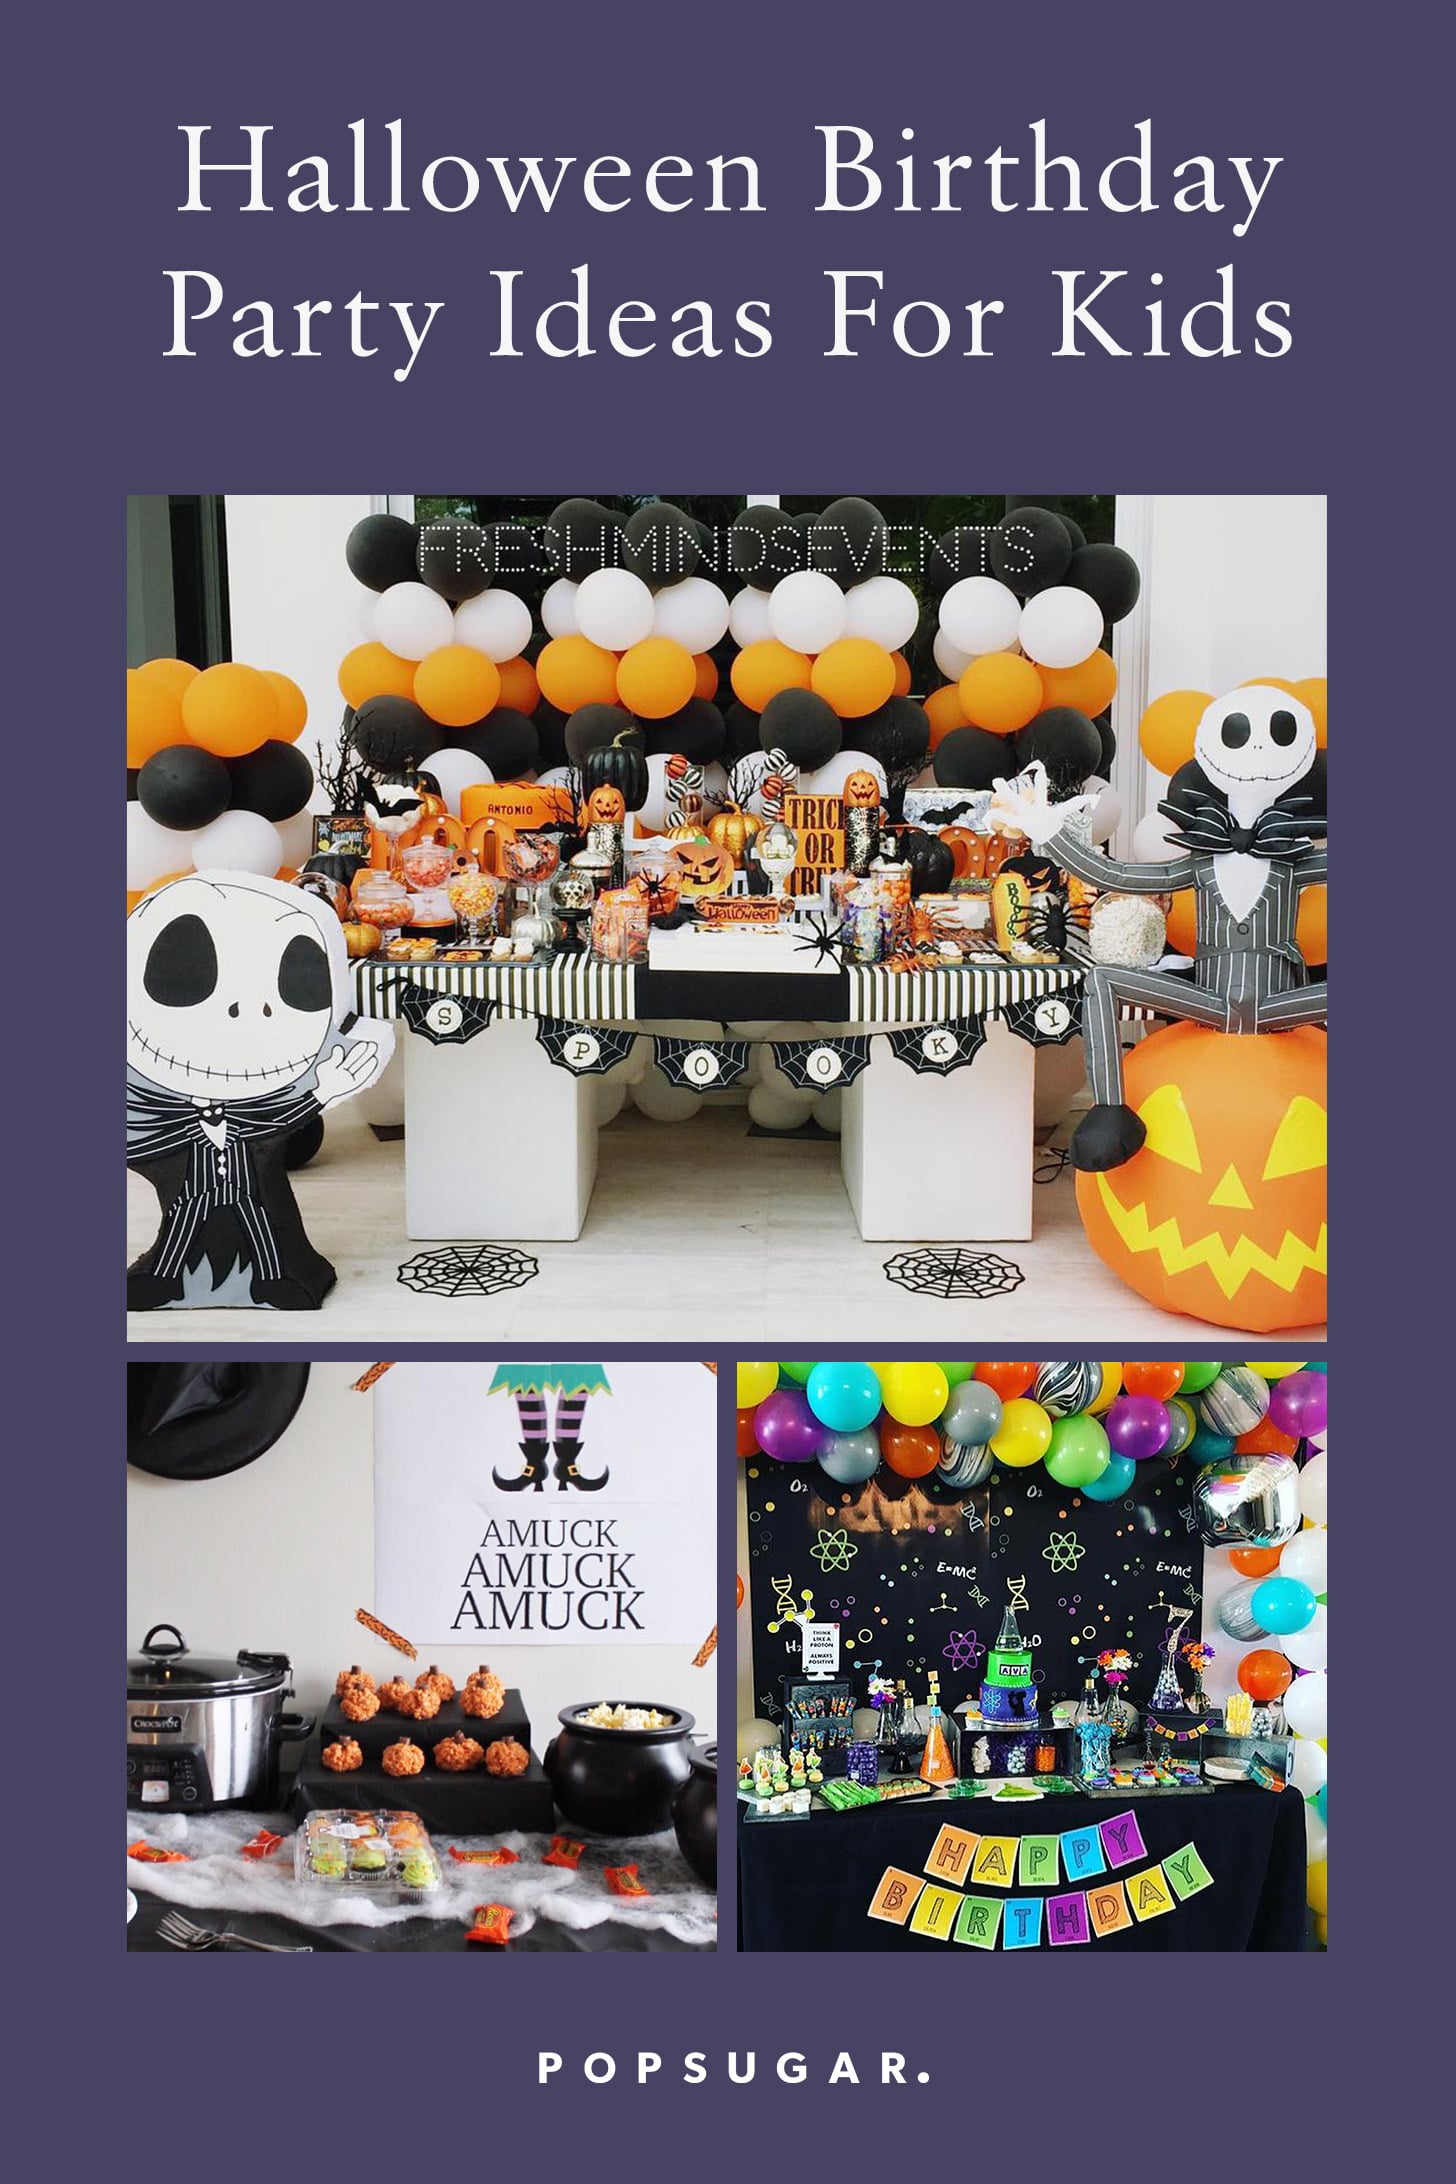 43+ Halloween Birthday Party Ideas For Adults Picture | Home ...